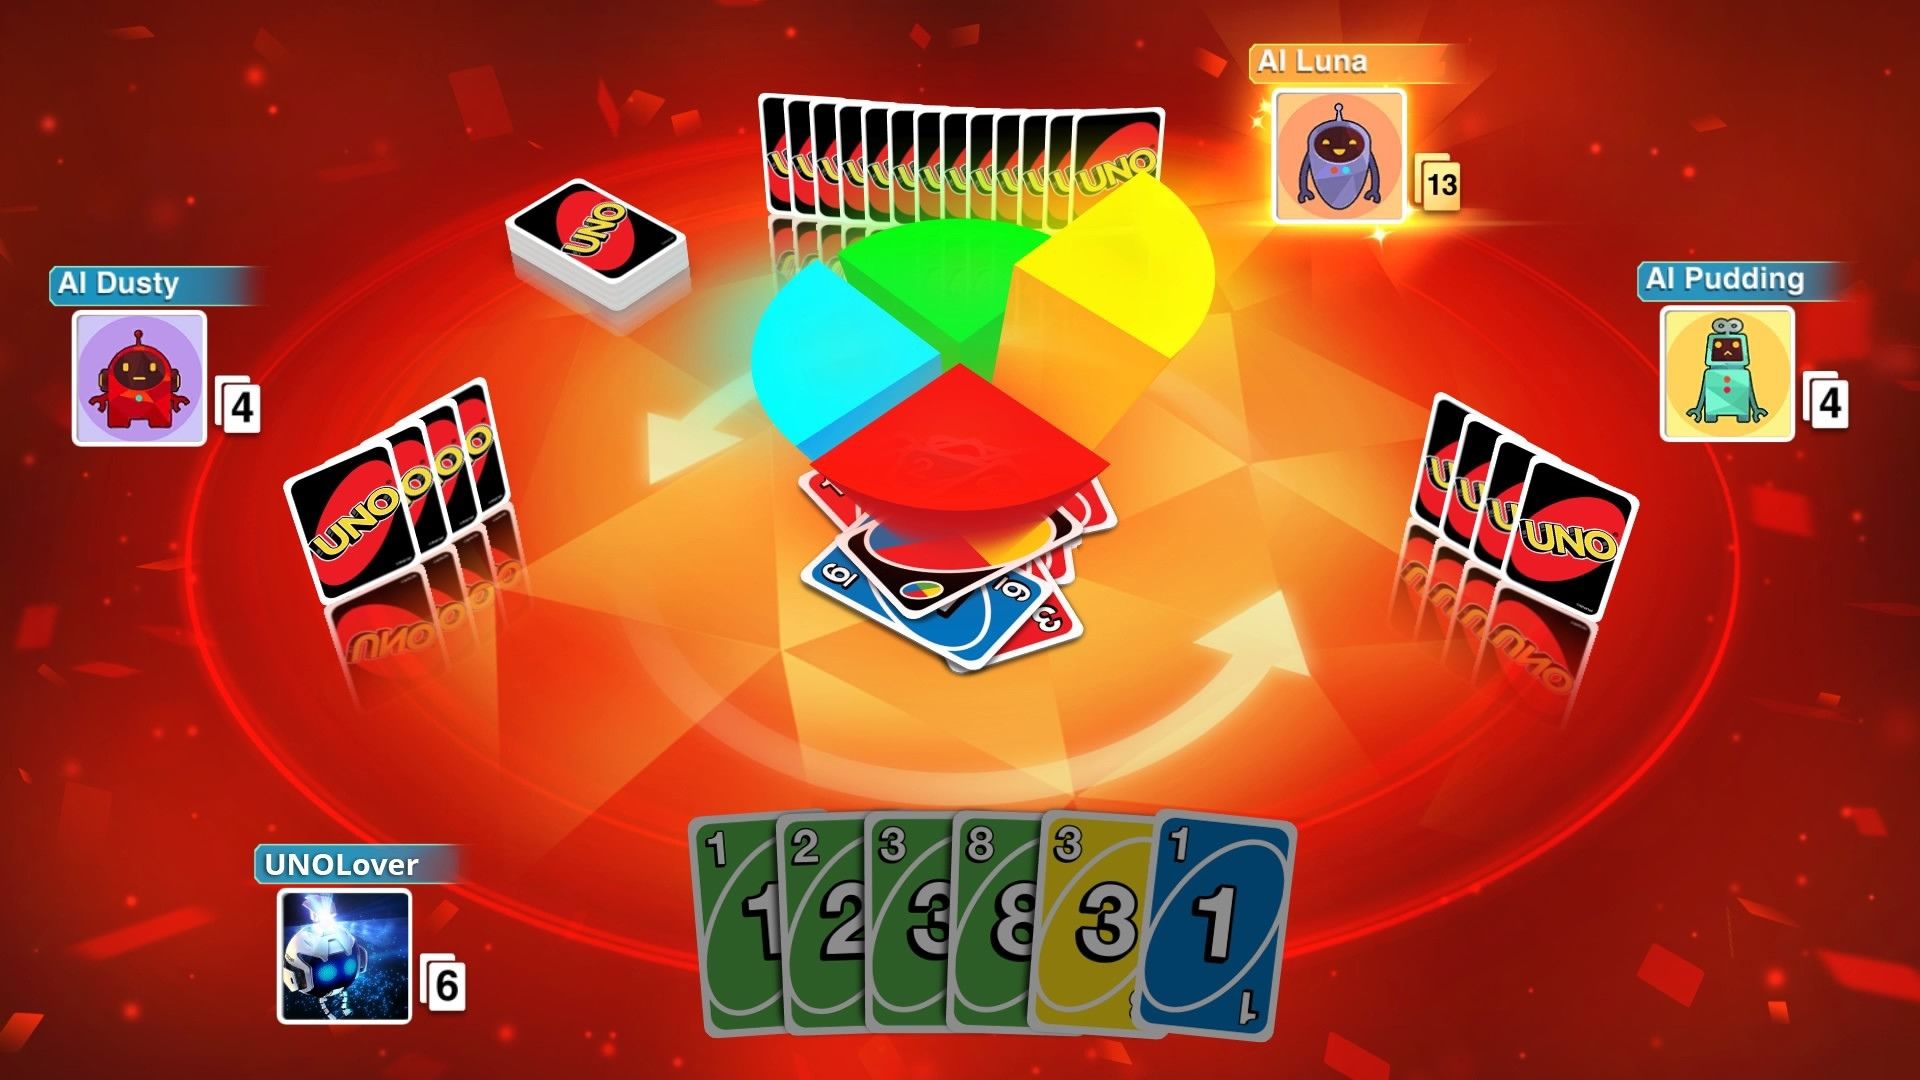 A screenshot from UNO, a party game, showing a circle with four quadrants cut in the middle, one blue, one green, one red, one yellow, and four lines of upstanding cards in a circle around them, with the players cards pointing towards the audience.